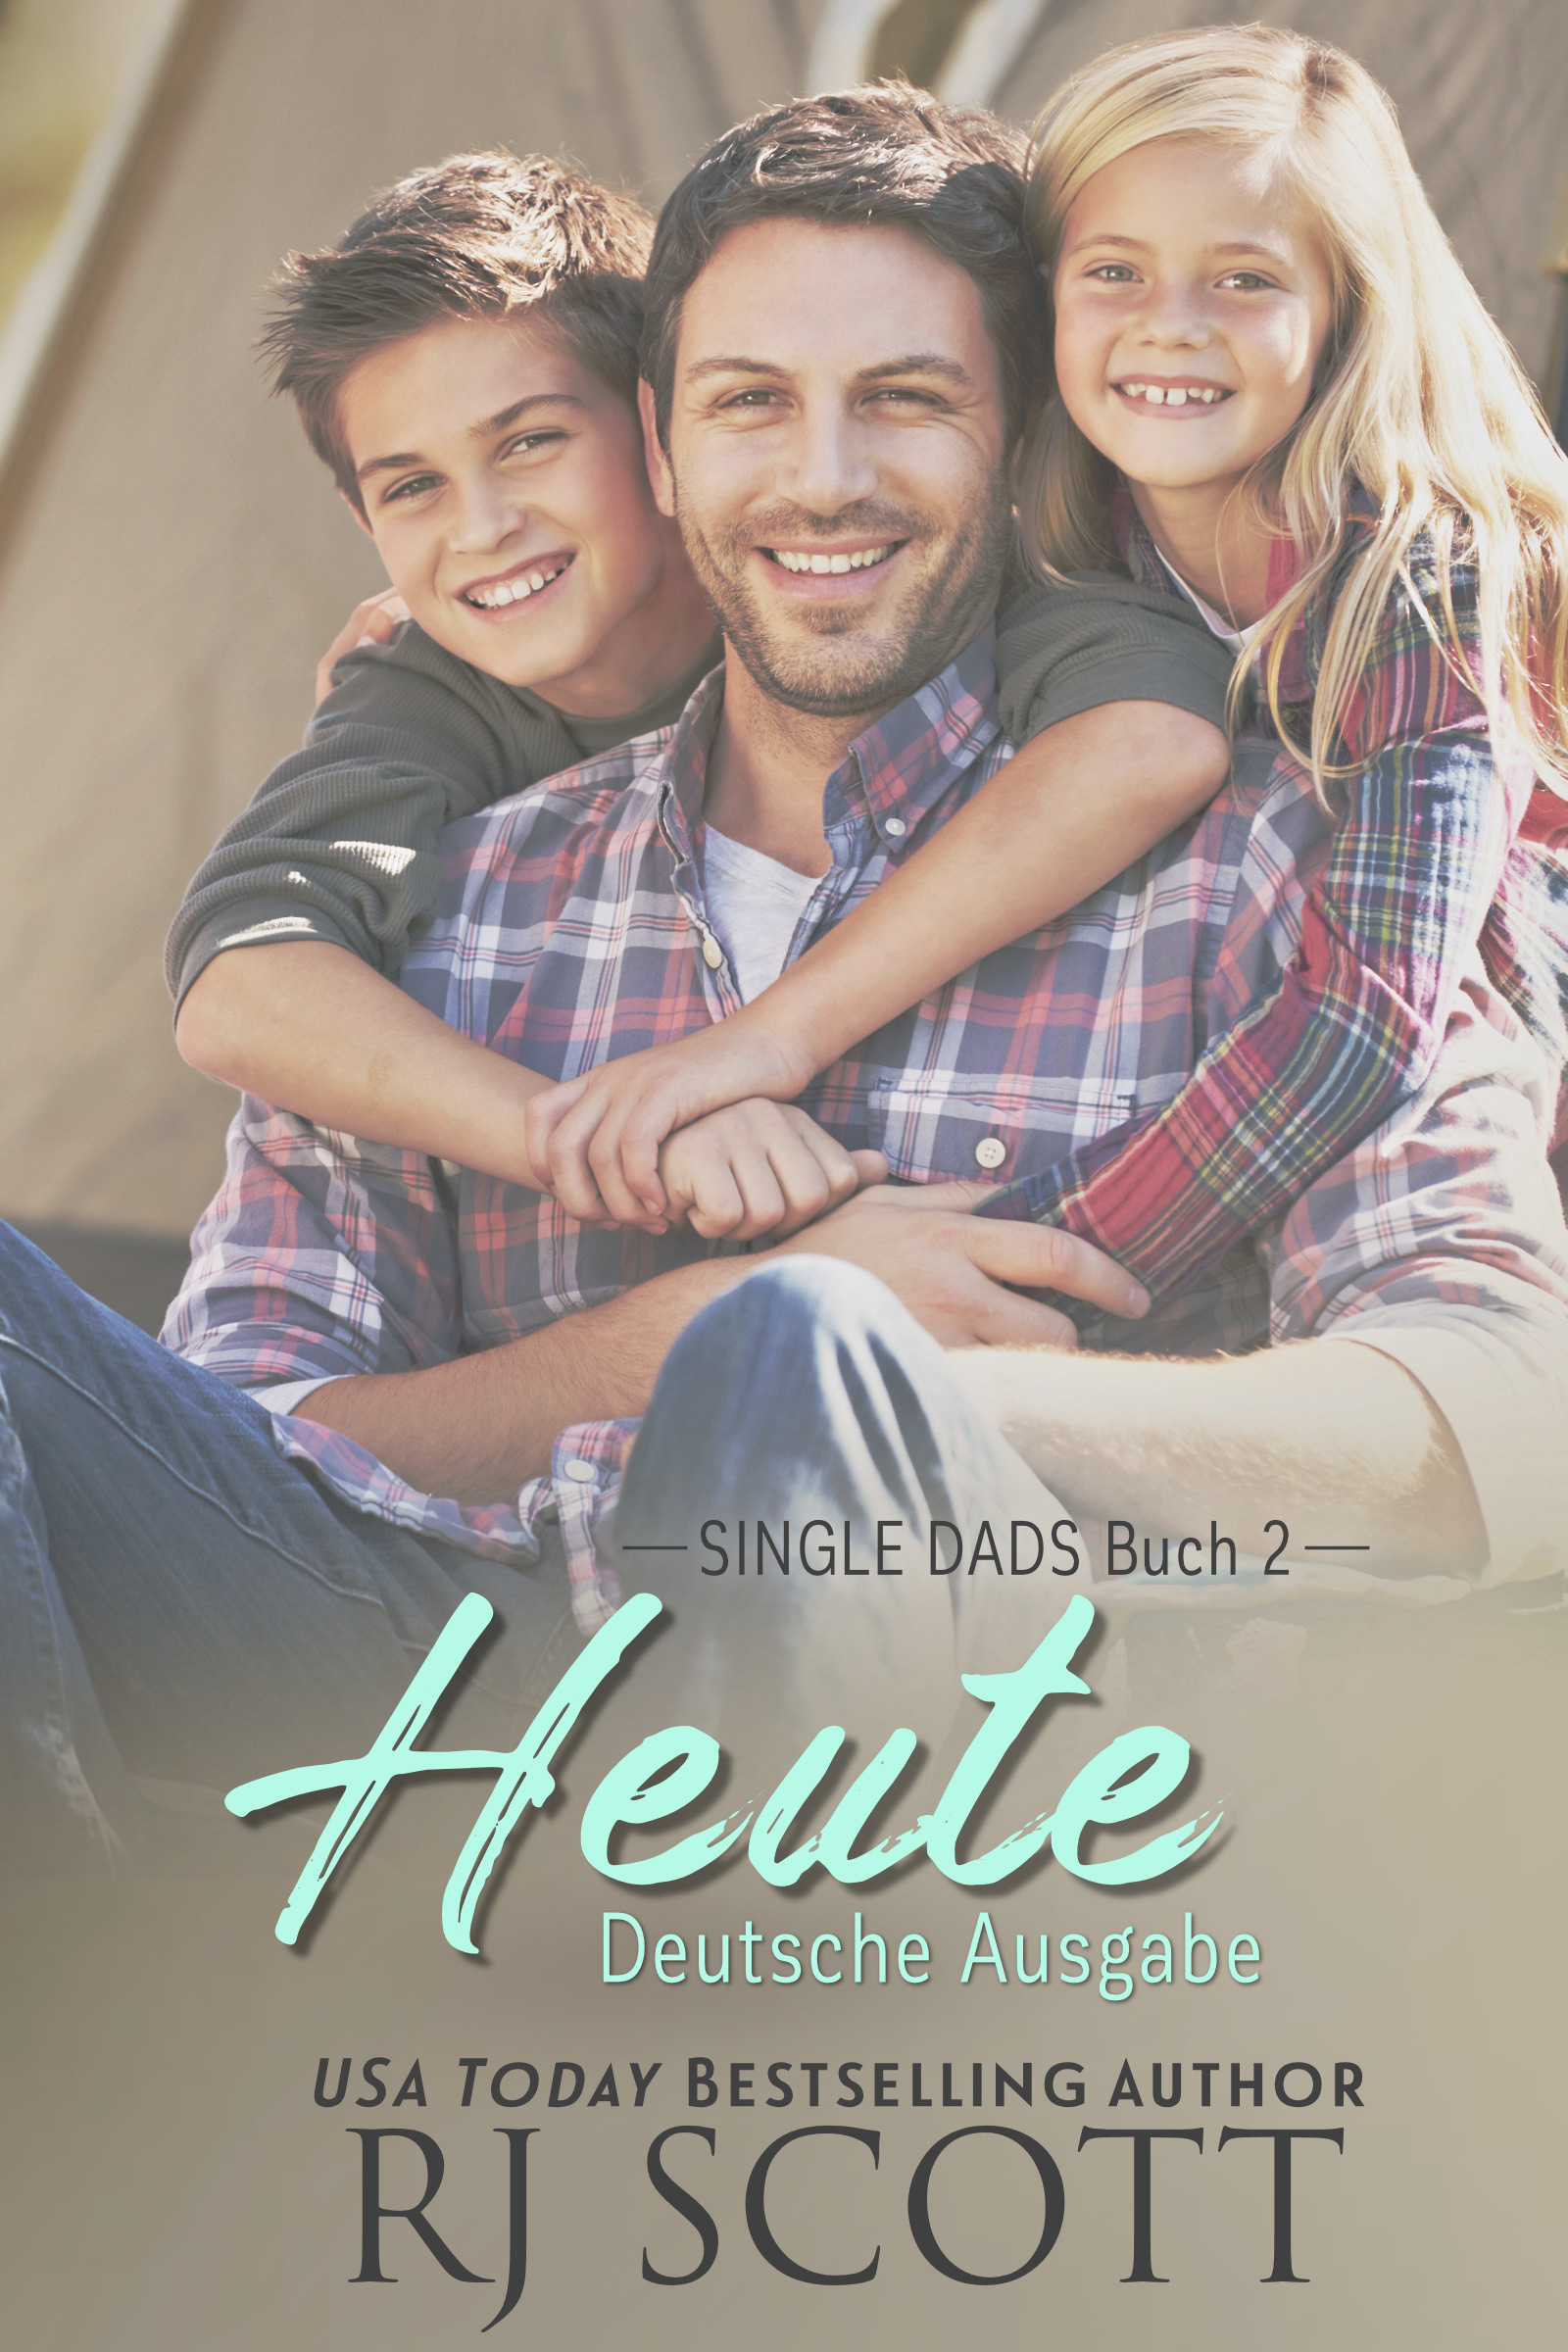 Heute (Deutsche Ausgabe), Single Dads Buch 2 - RJ SCOTT USA TODAY Bestselling Author of Gay MM Romance with a guaranteed Happy Ever After